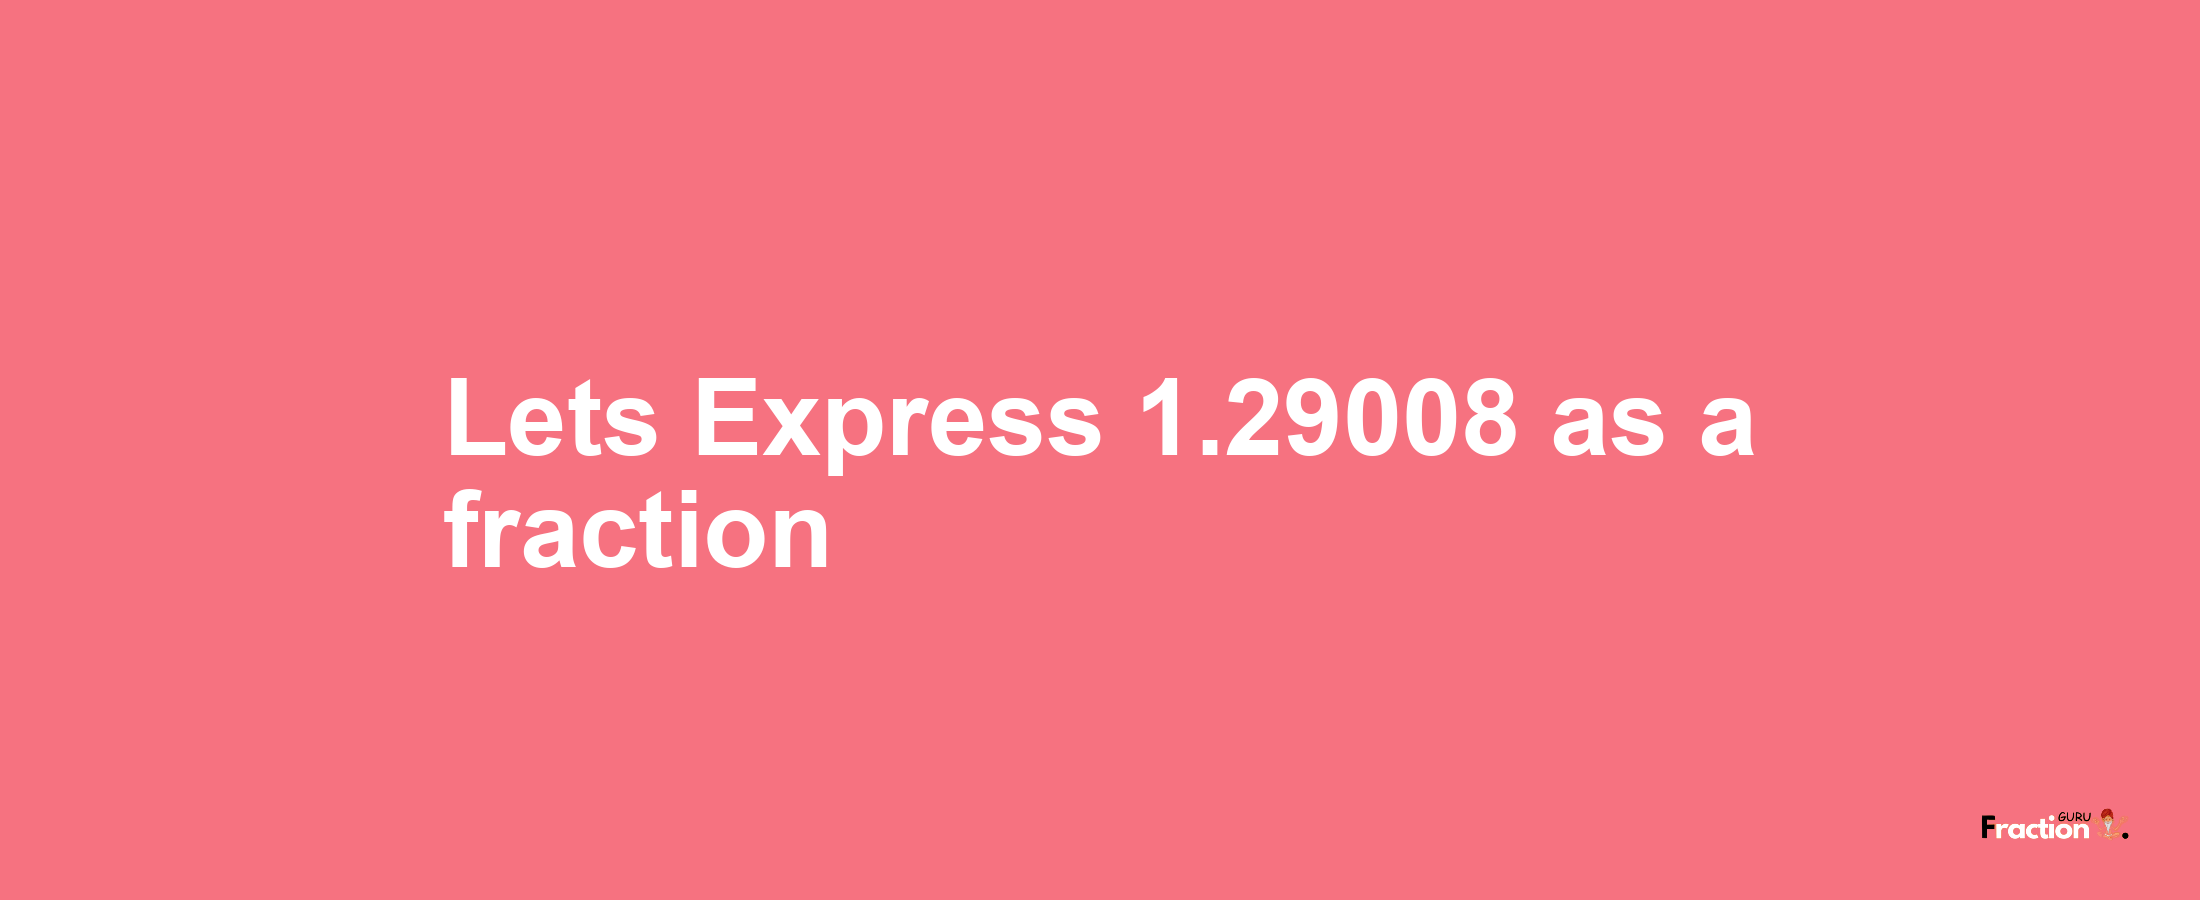 Lets Express 1.29008 as afraction